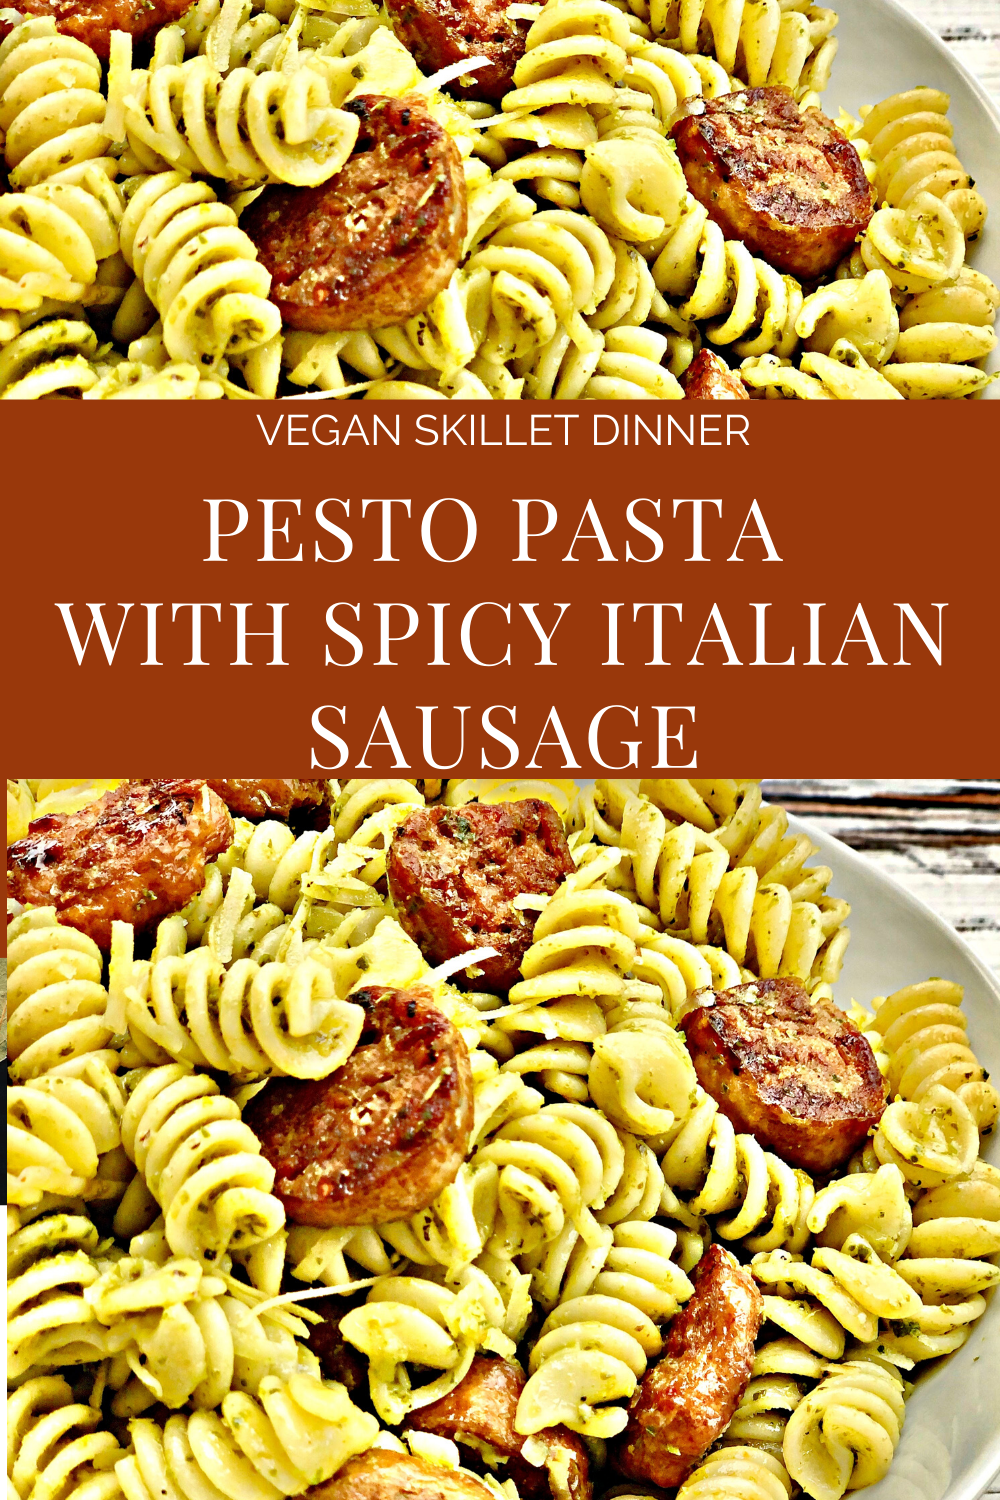 Pesto Pasta with Sausage - A savory and satisfying skillet dinner made with a simple pesto sauce spicy plant-based sausage. Ready to serve in about 30 minutes. #pestopastawithsausage #veganpastarecipes #thiswifecooksecipes #veganquarantinerecipes #easyveganweeknightdinners via @thiswifecooks